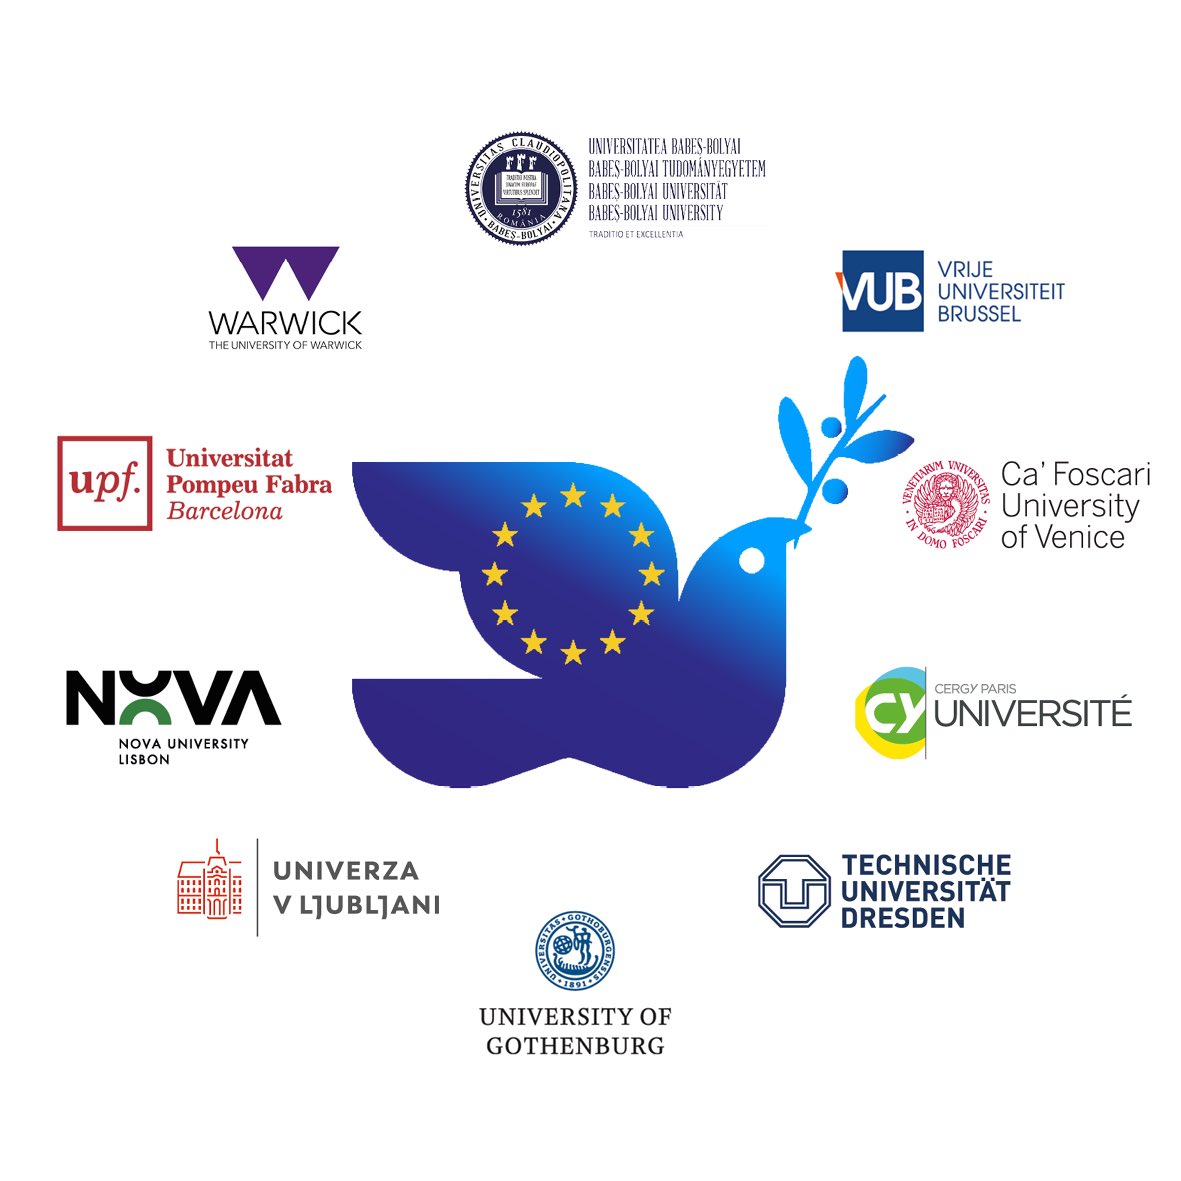 Today, 9 May, Europe Day, the ten #EUTOPIA Alliance universities proudly reaffirm their commitment to designing the future of Higher Education and Research in Europe and upholding democracy, respect for human rights and the rule of law. bit.ly/3Wx43rq